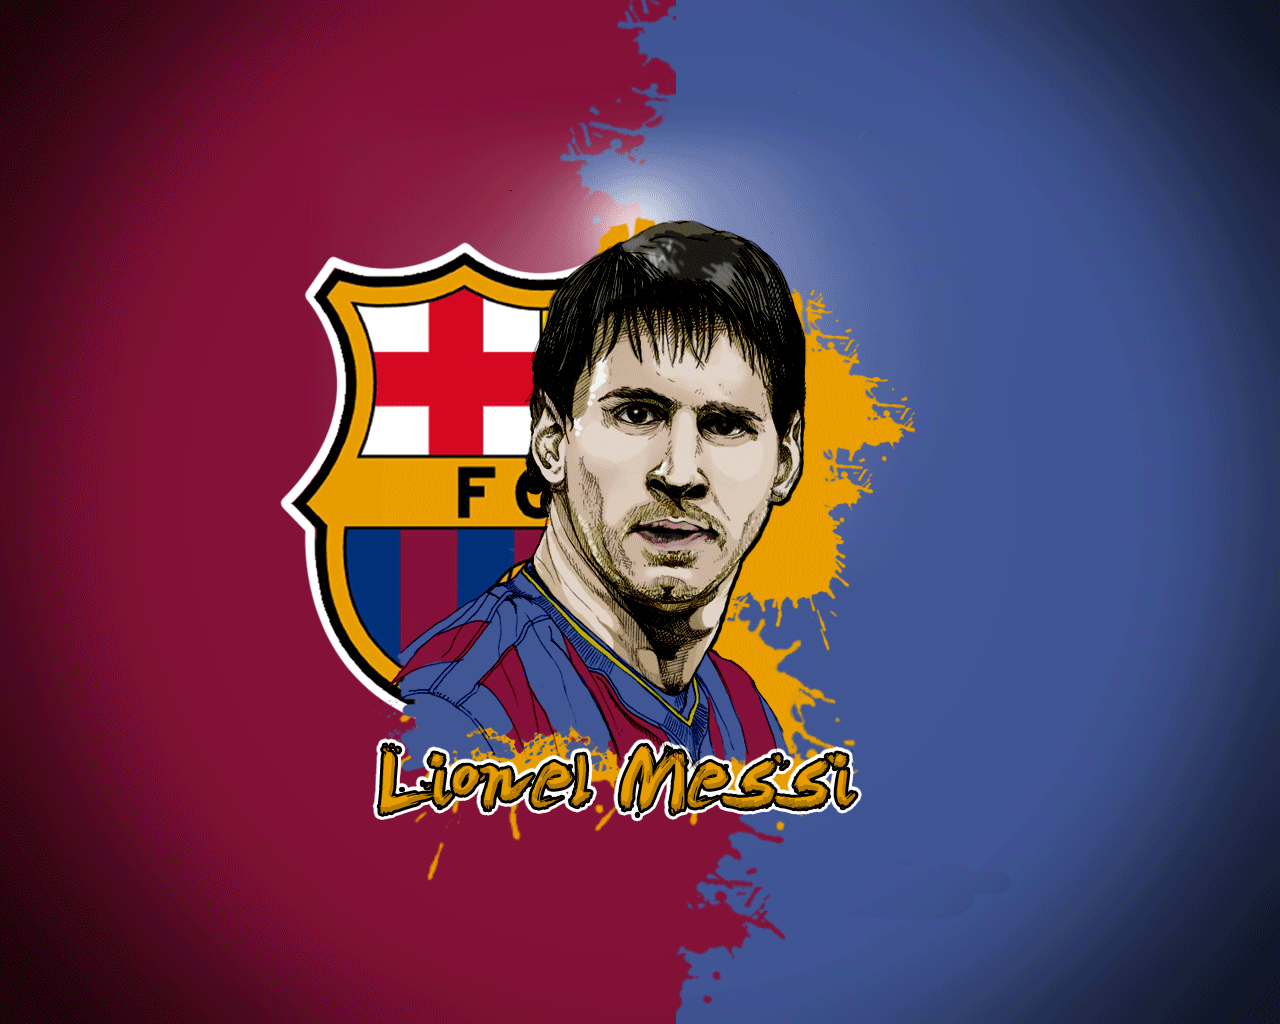 TOP HD WALLPAPERS: MESSI WALLPAPERS